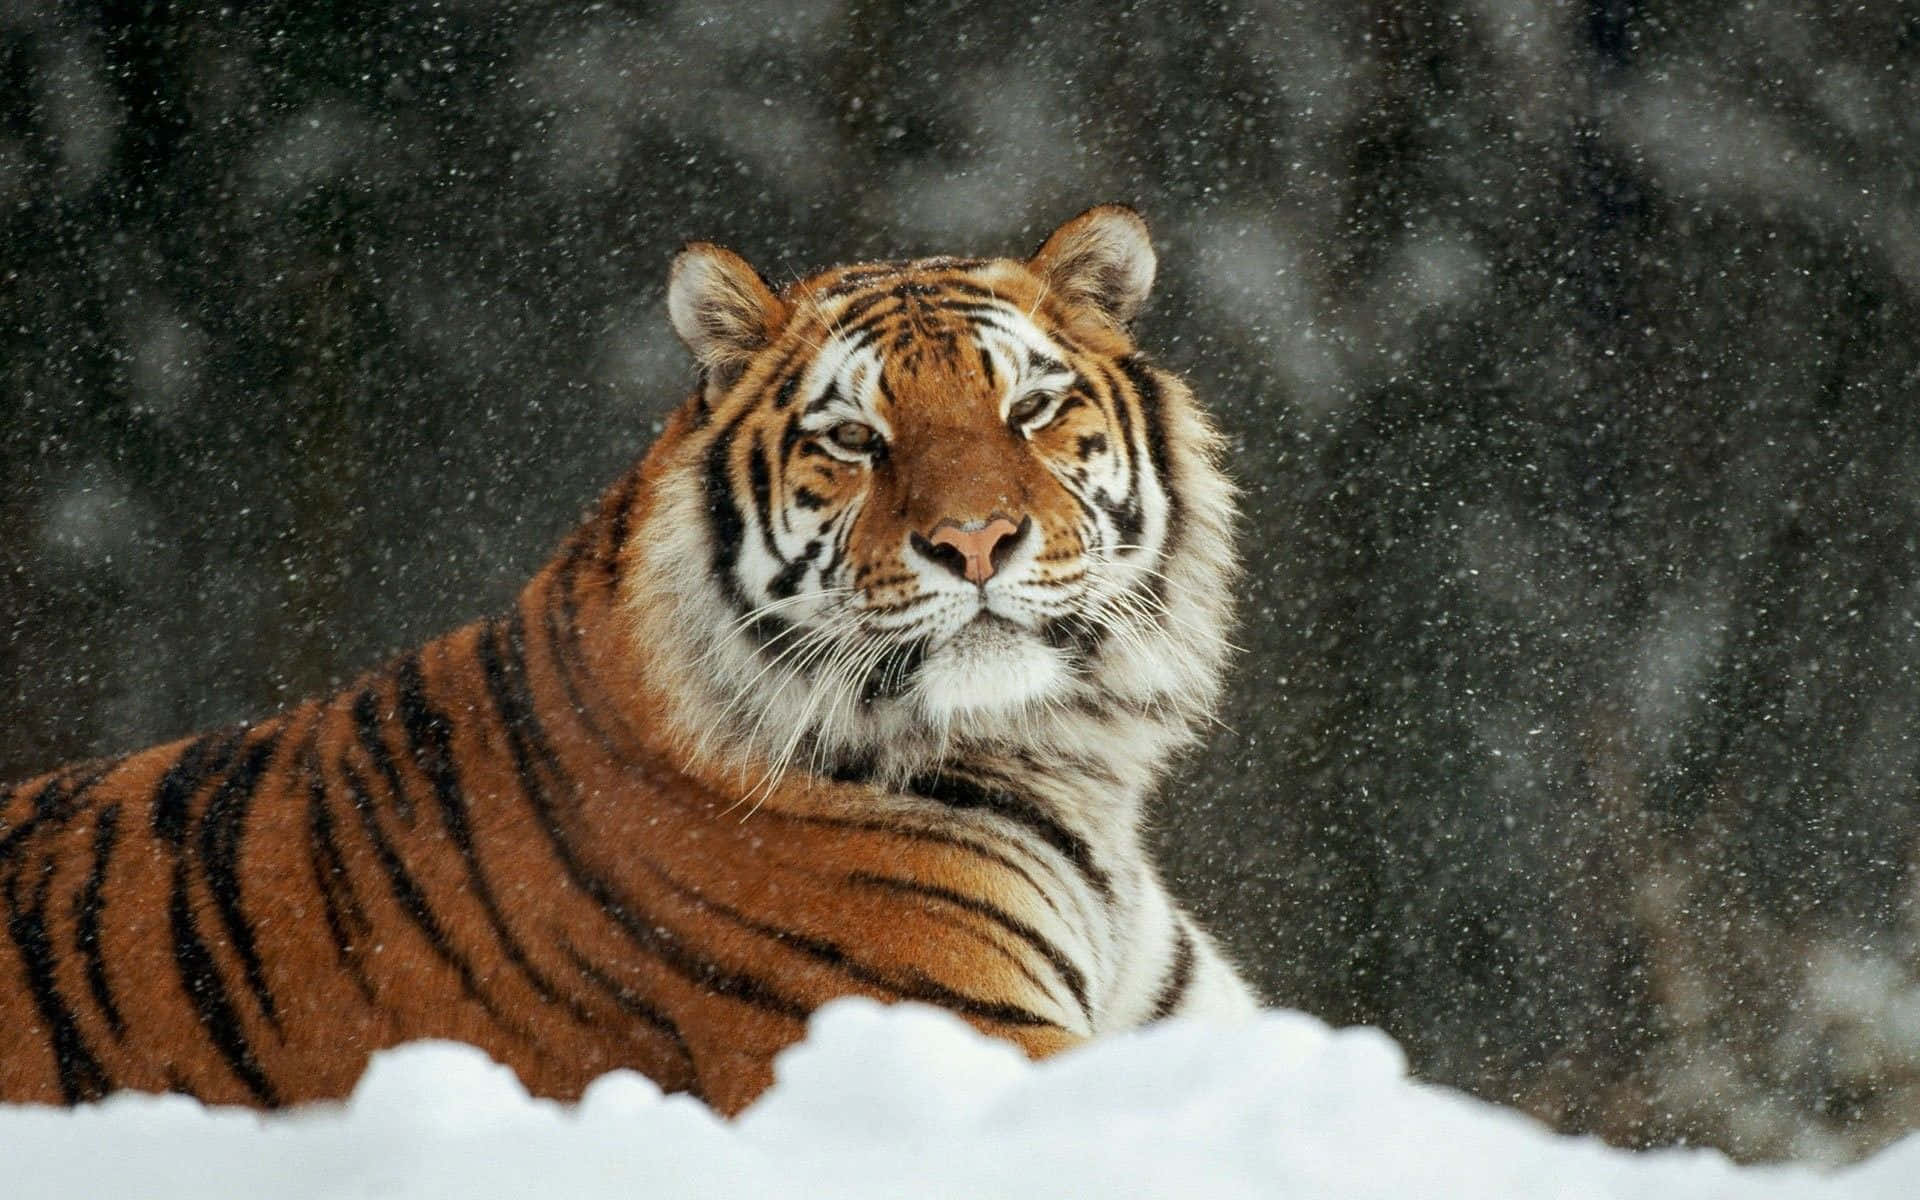 Cute Chubby Tiger Snow Picture